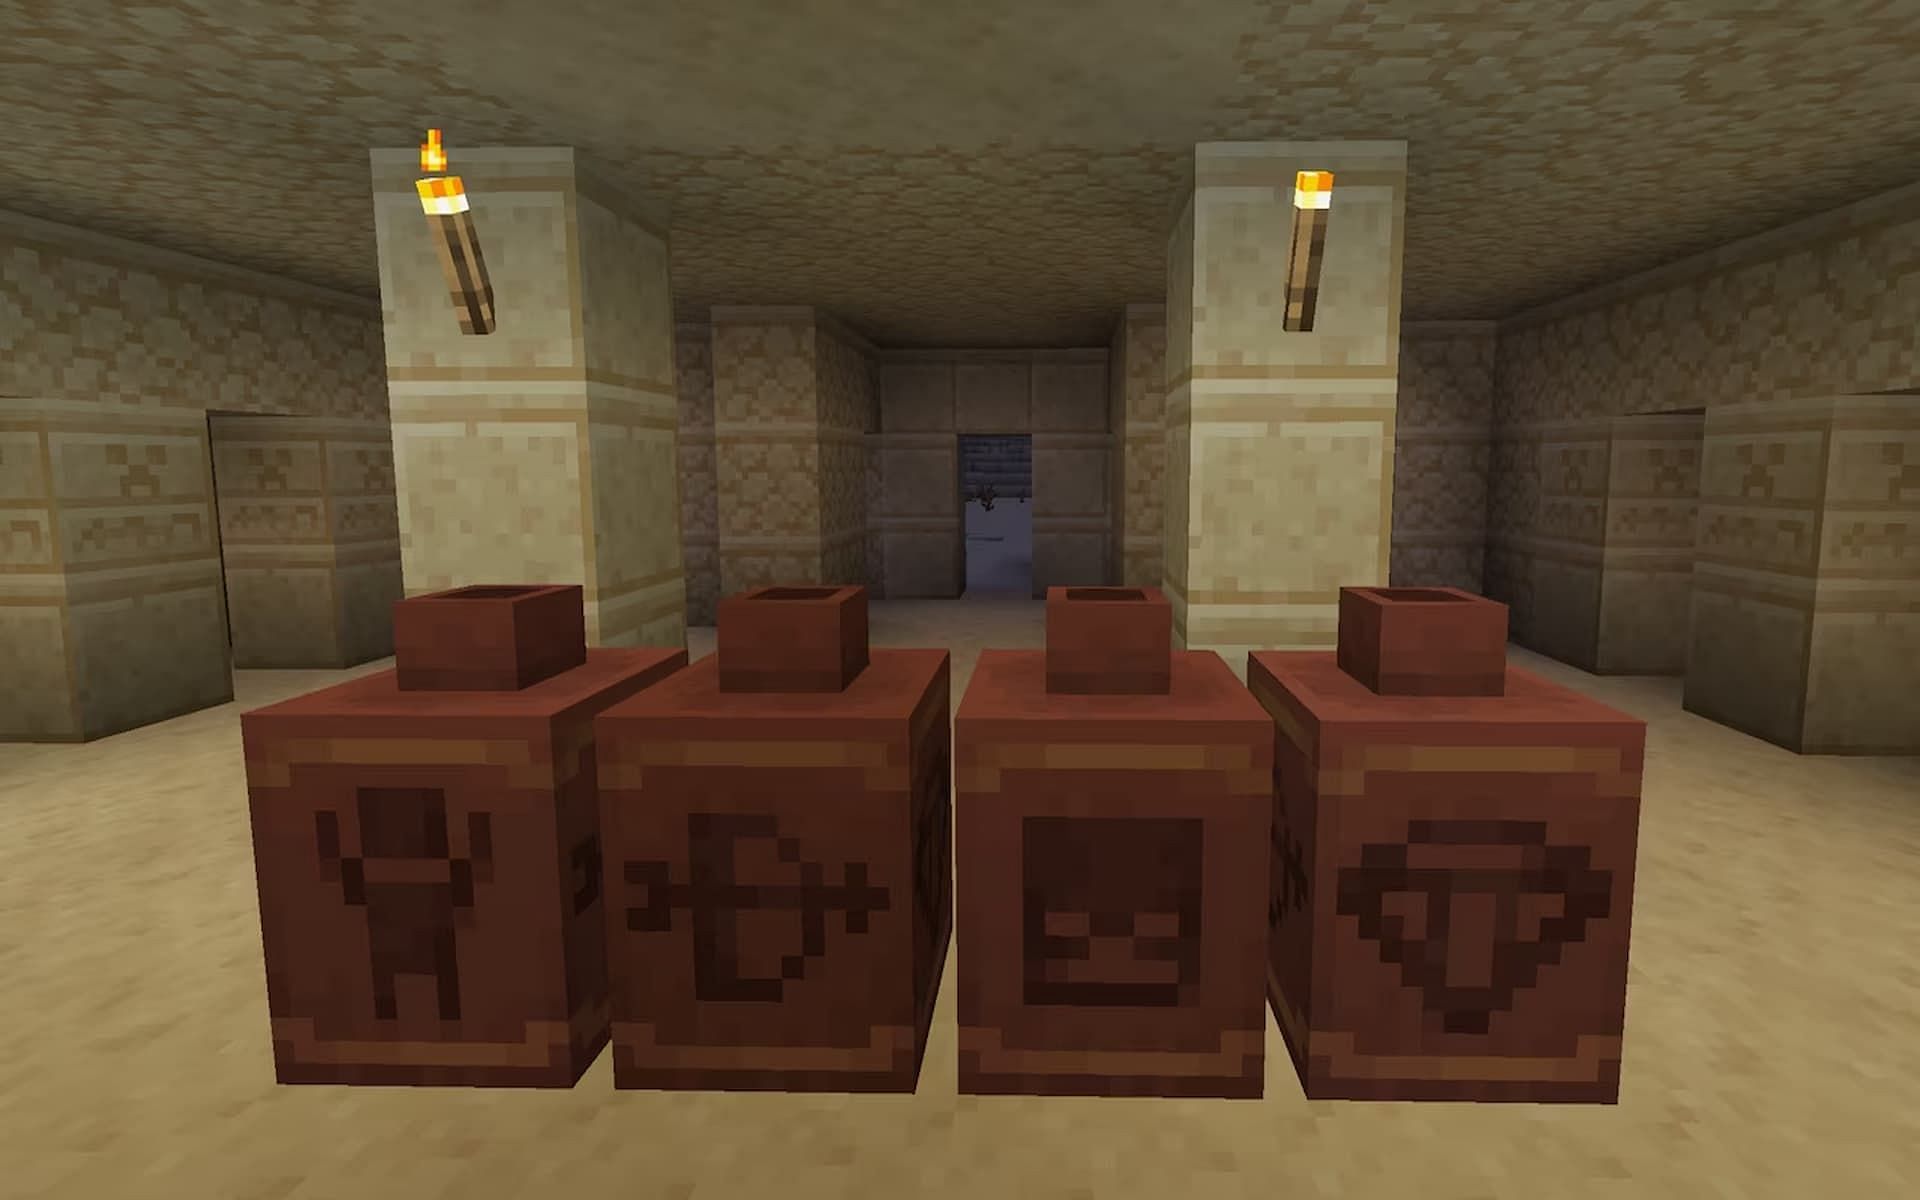 With archeology, players will be able to discover ancient pottery by finding four matching pottery shards (Image via Mojang)